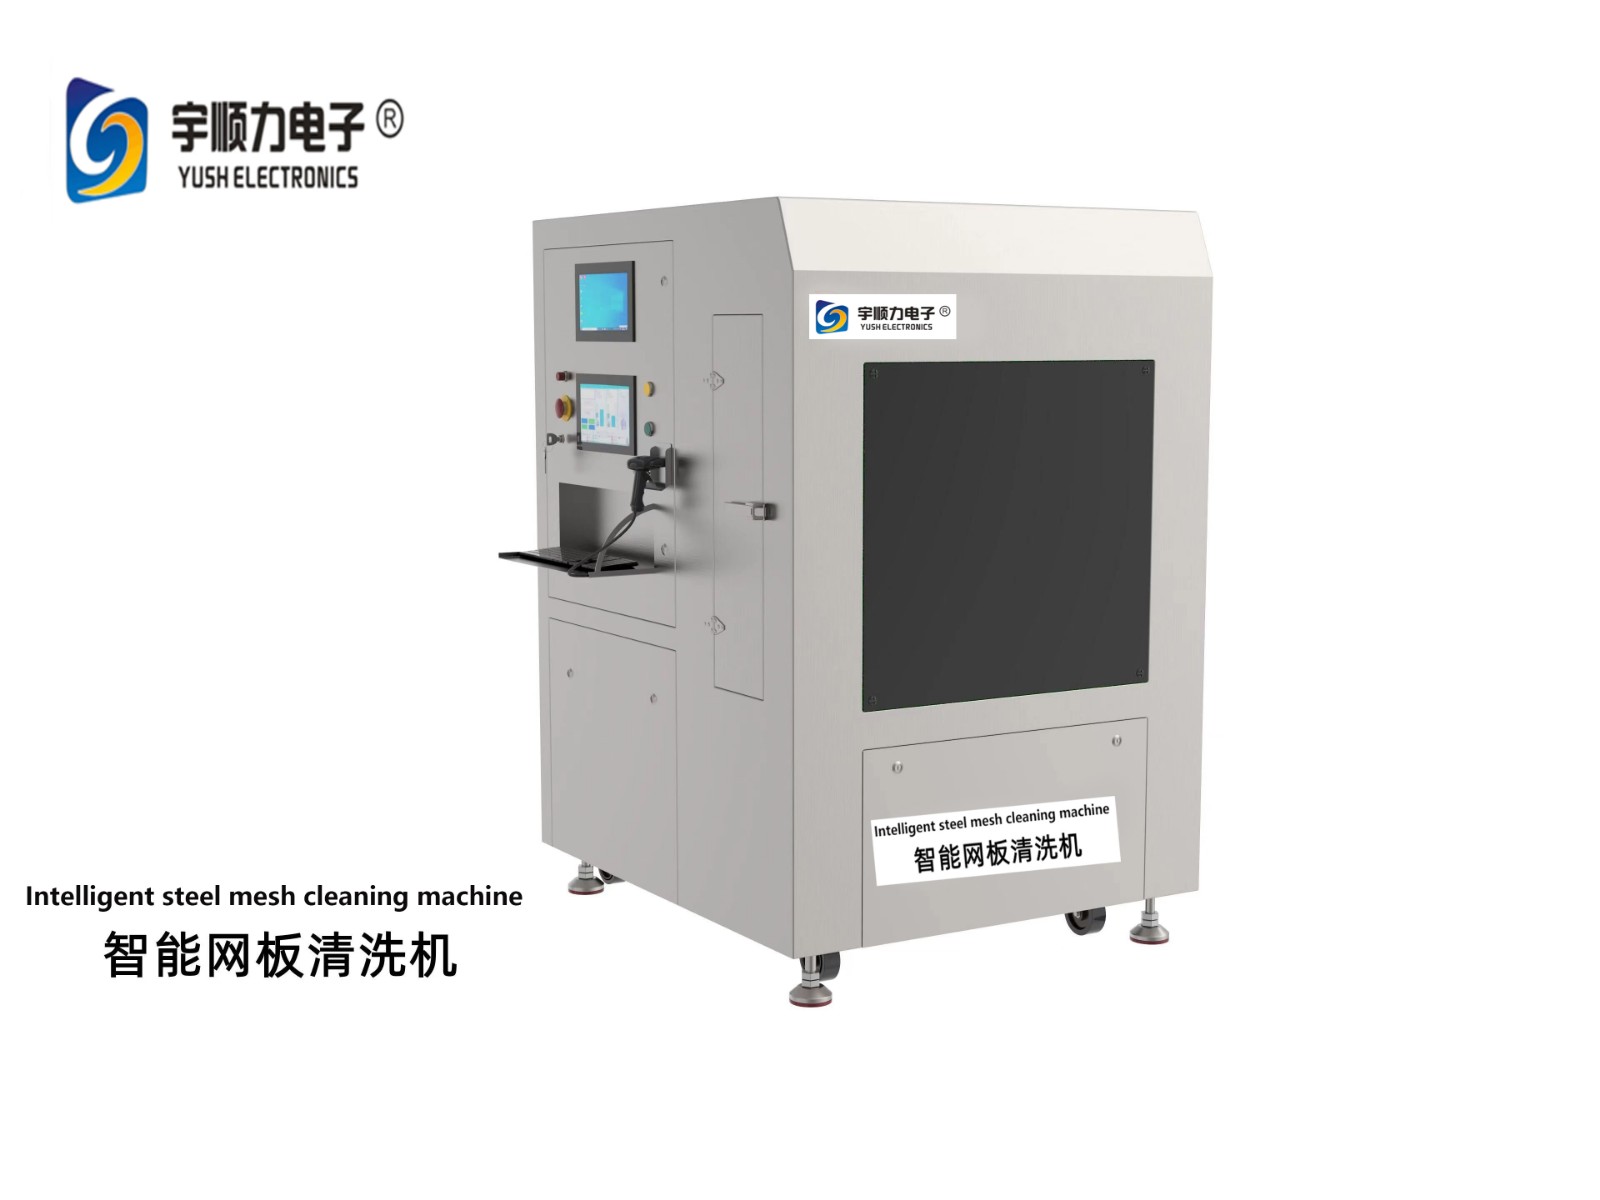 Smt Intelligent Steel Mesh Cleaning Machine-Smt Intelligent Steel Mesh Cleaning Machine Manufacturers, Suppliers and Exporters on pcb-router.com